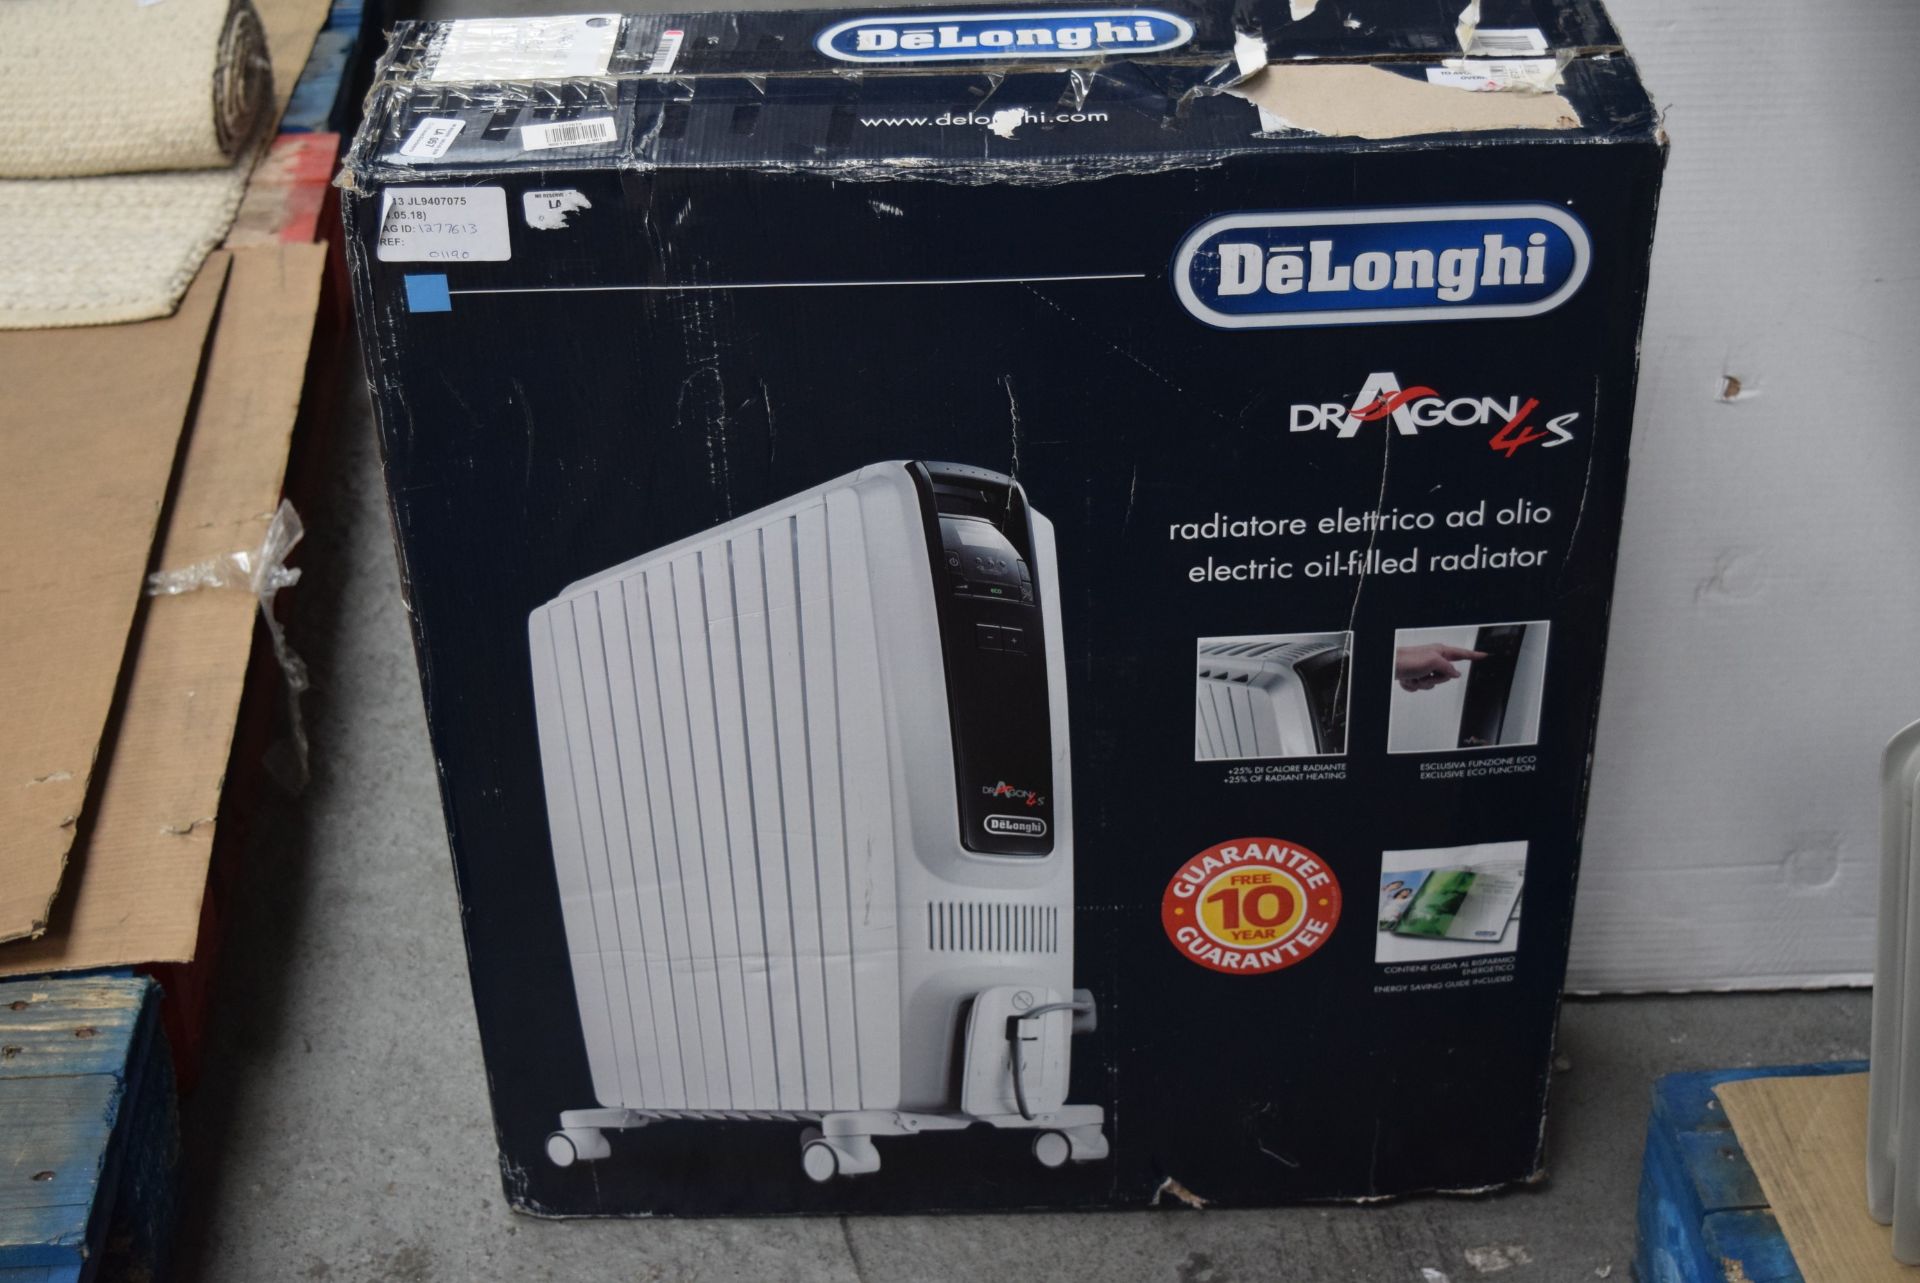 1 X BOXED DELONGHI DRAGON 4S ELECTRIC OIL FILLED RADIATOR RRP £120 04.05.18 1277613